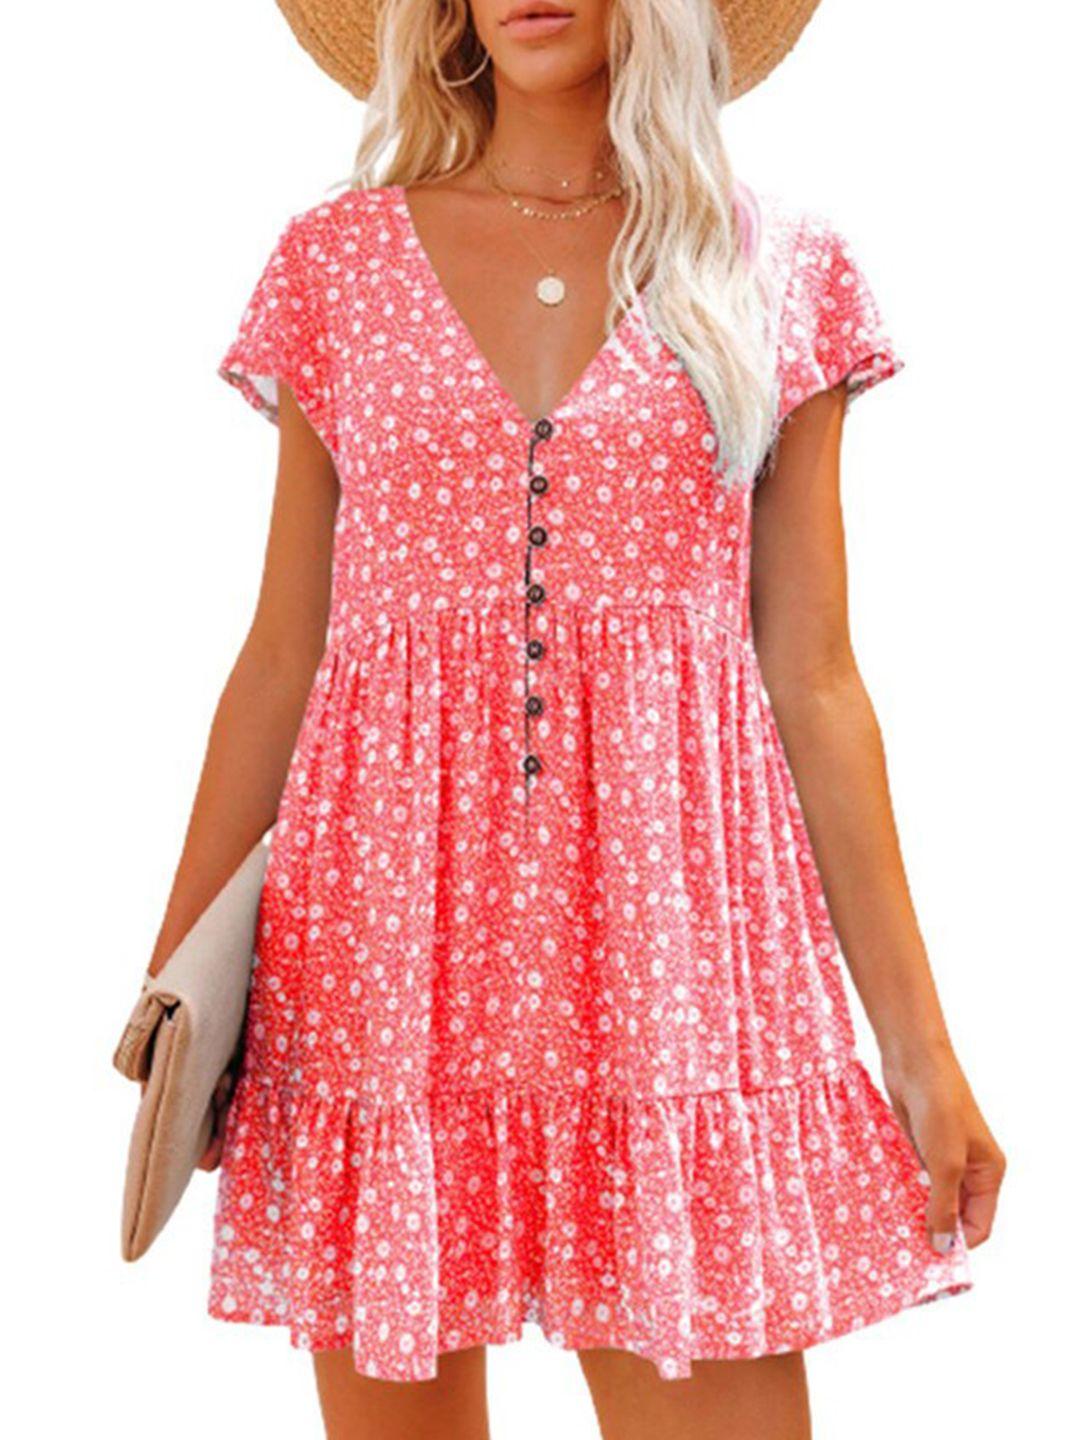 stylecast pink floral printed v-neck cotton casual fit & flare mini dress